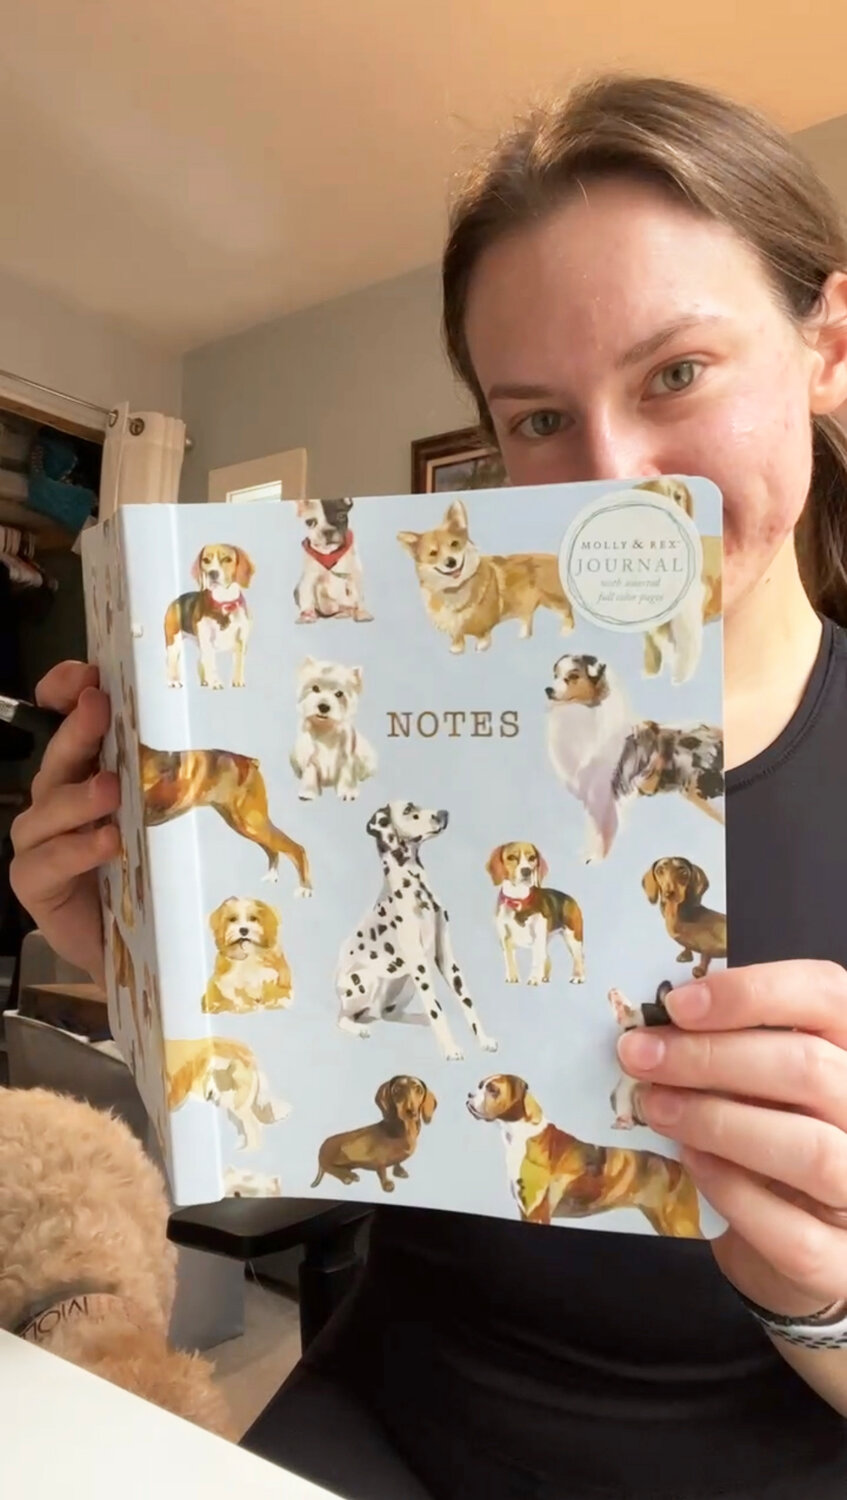 If you want to increase the speed of your habit building even more, get a journal you love. Bonus points from me if it has dogs on it!